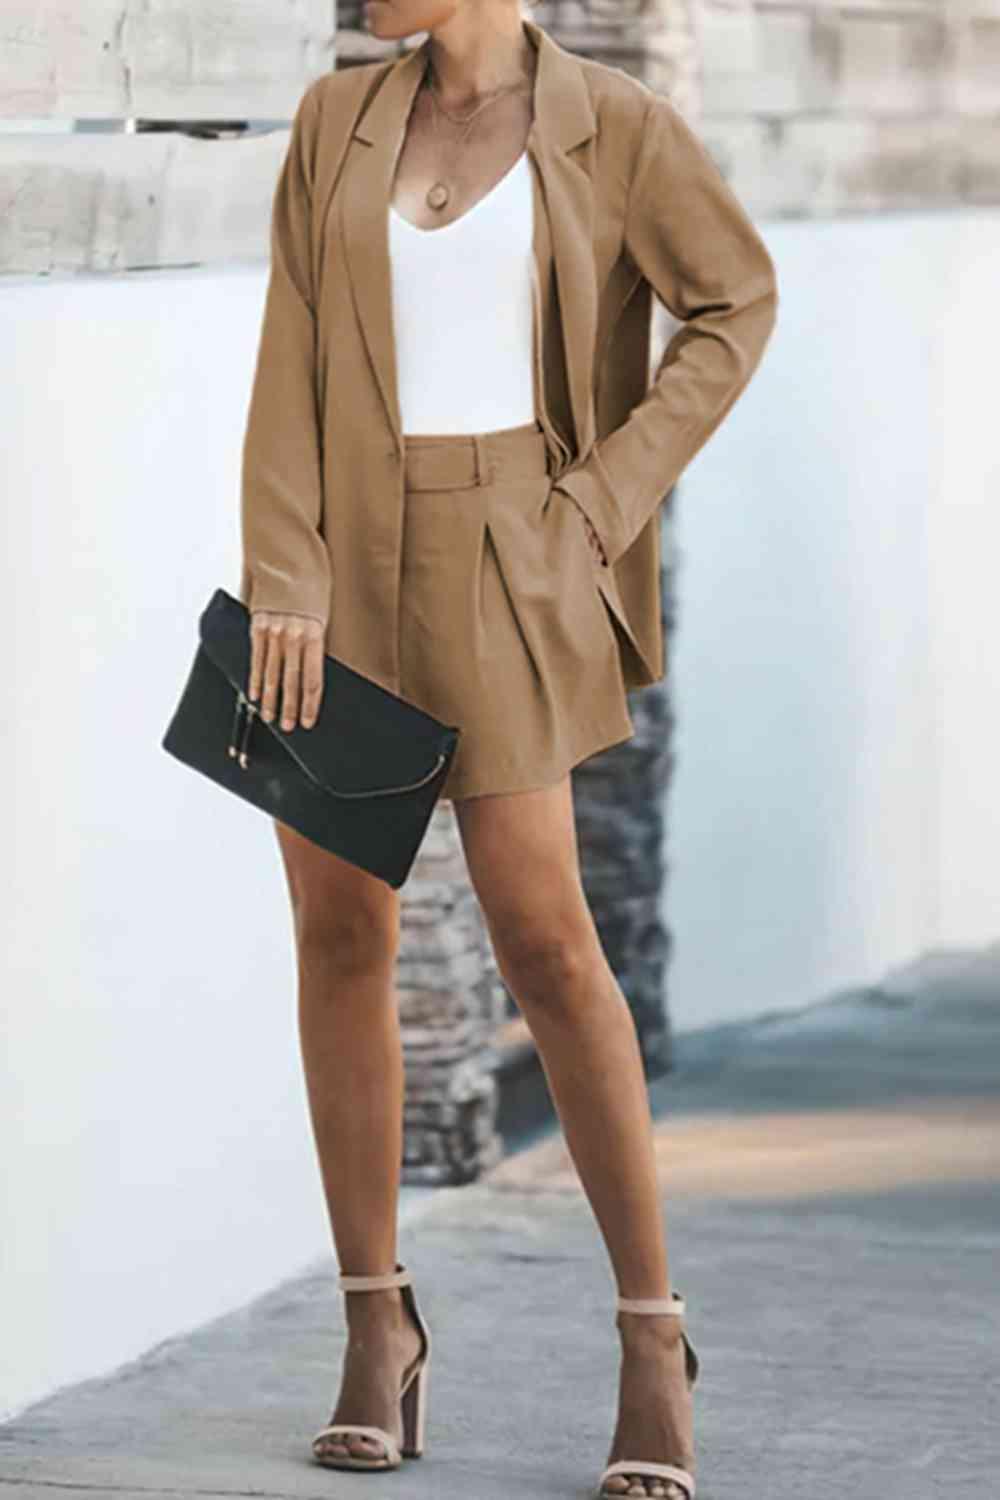 a woman wearing a tan suit and heels